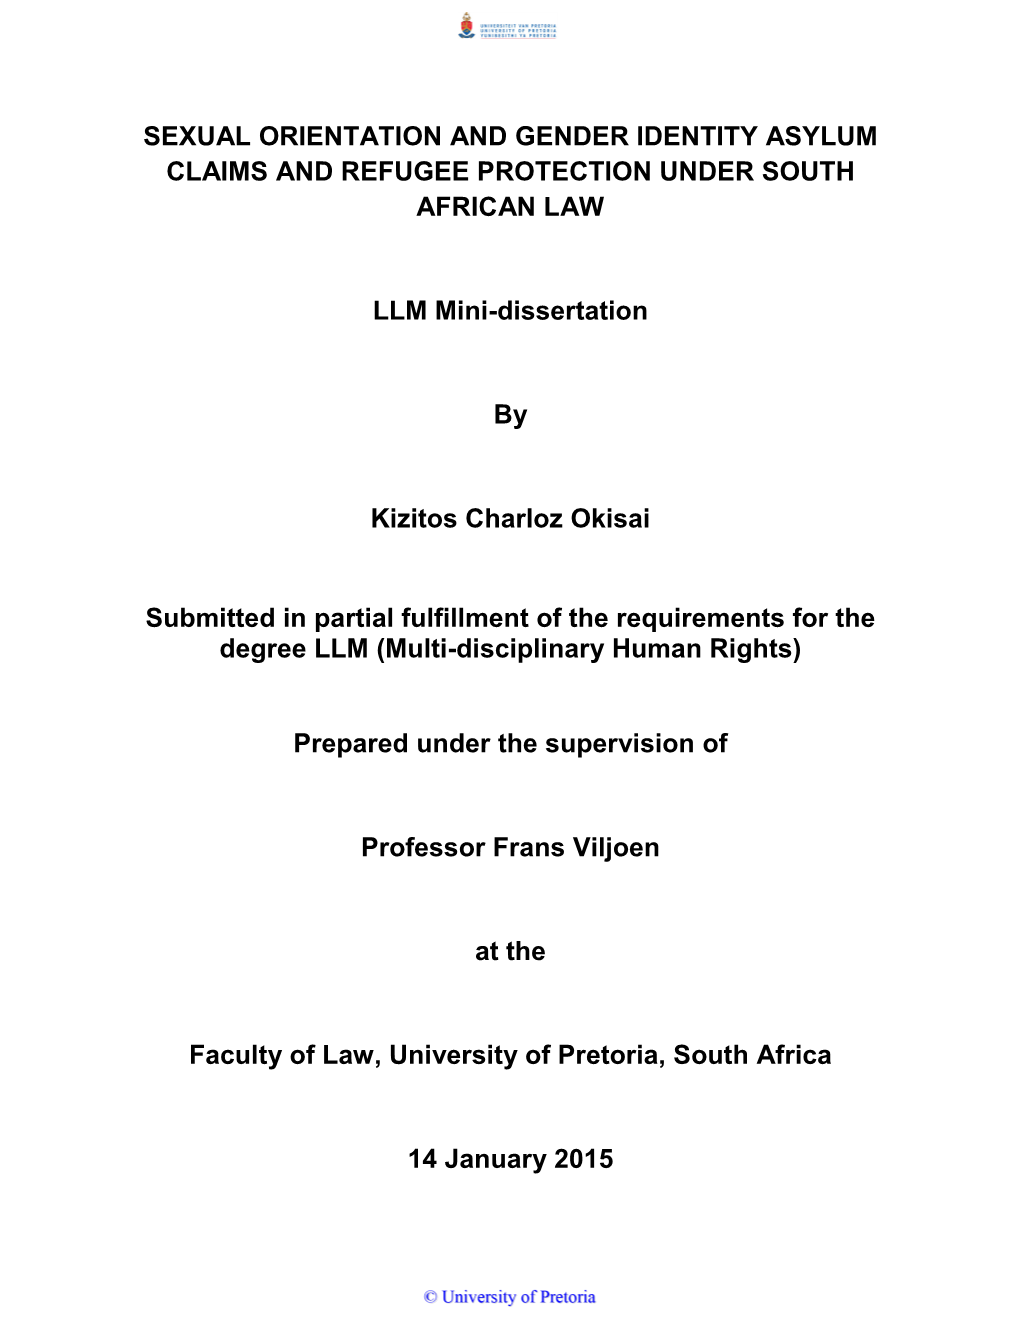 Sexual Orientation and Gender Identity Asylum Claims and Refugee Protection Under South African Law